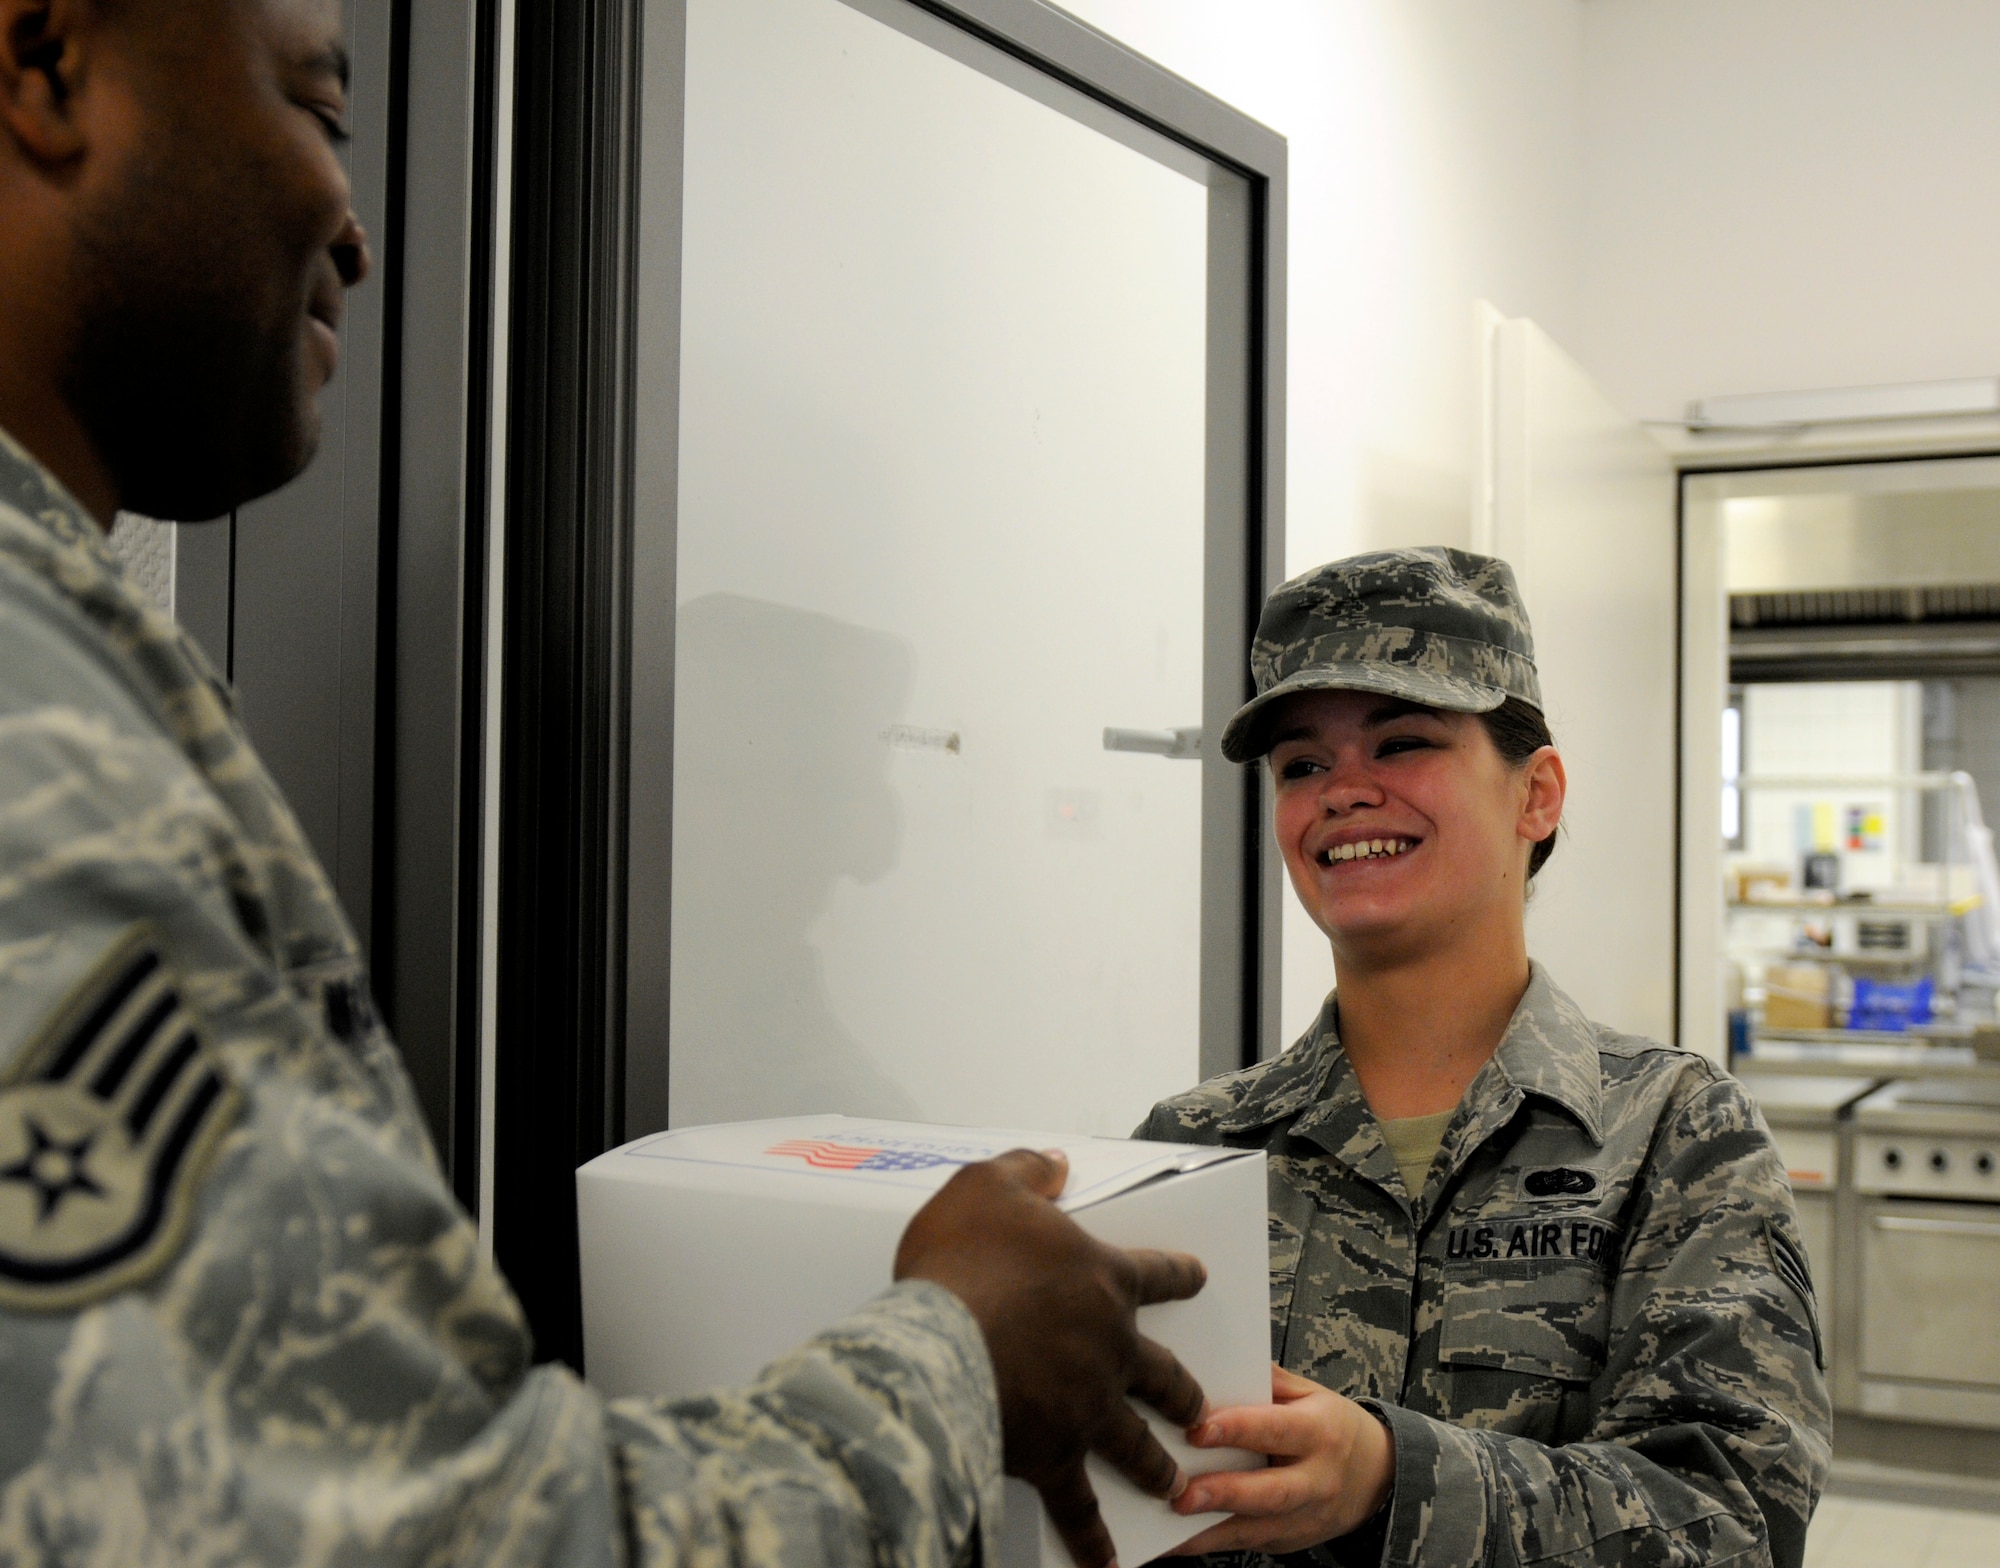 SPANGDAHLEM AIR BASE, Germany – Senior Airman Kimberly Lilly, 52nd Force Support Squadron assistant NCO in charge of the Flight Kitchen, is the Super Saber Performer for the week of May. 20-26. (U.S. Air Force photo/Airman 1st Class Brittney Frees)